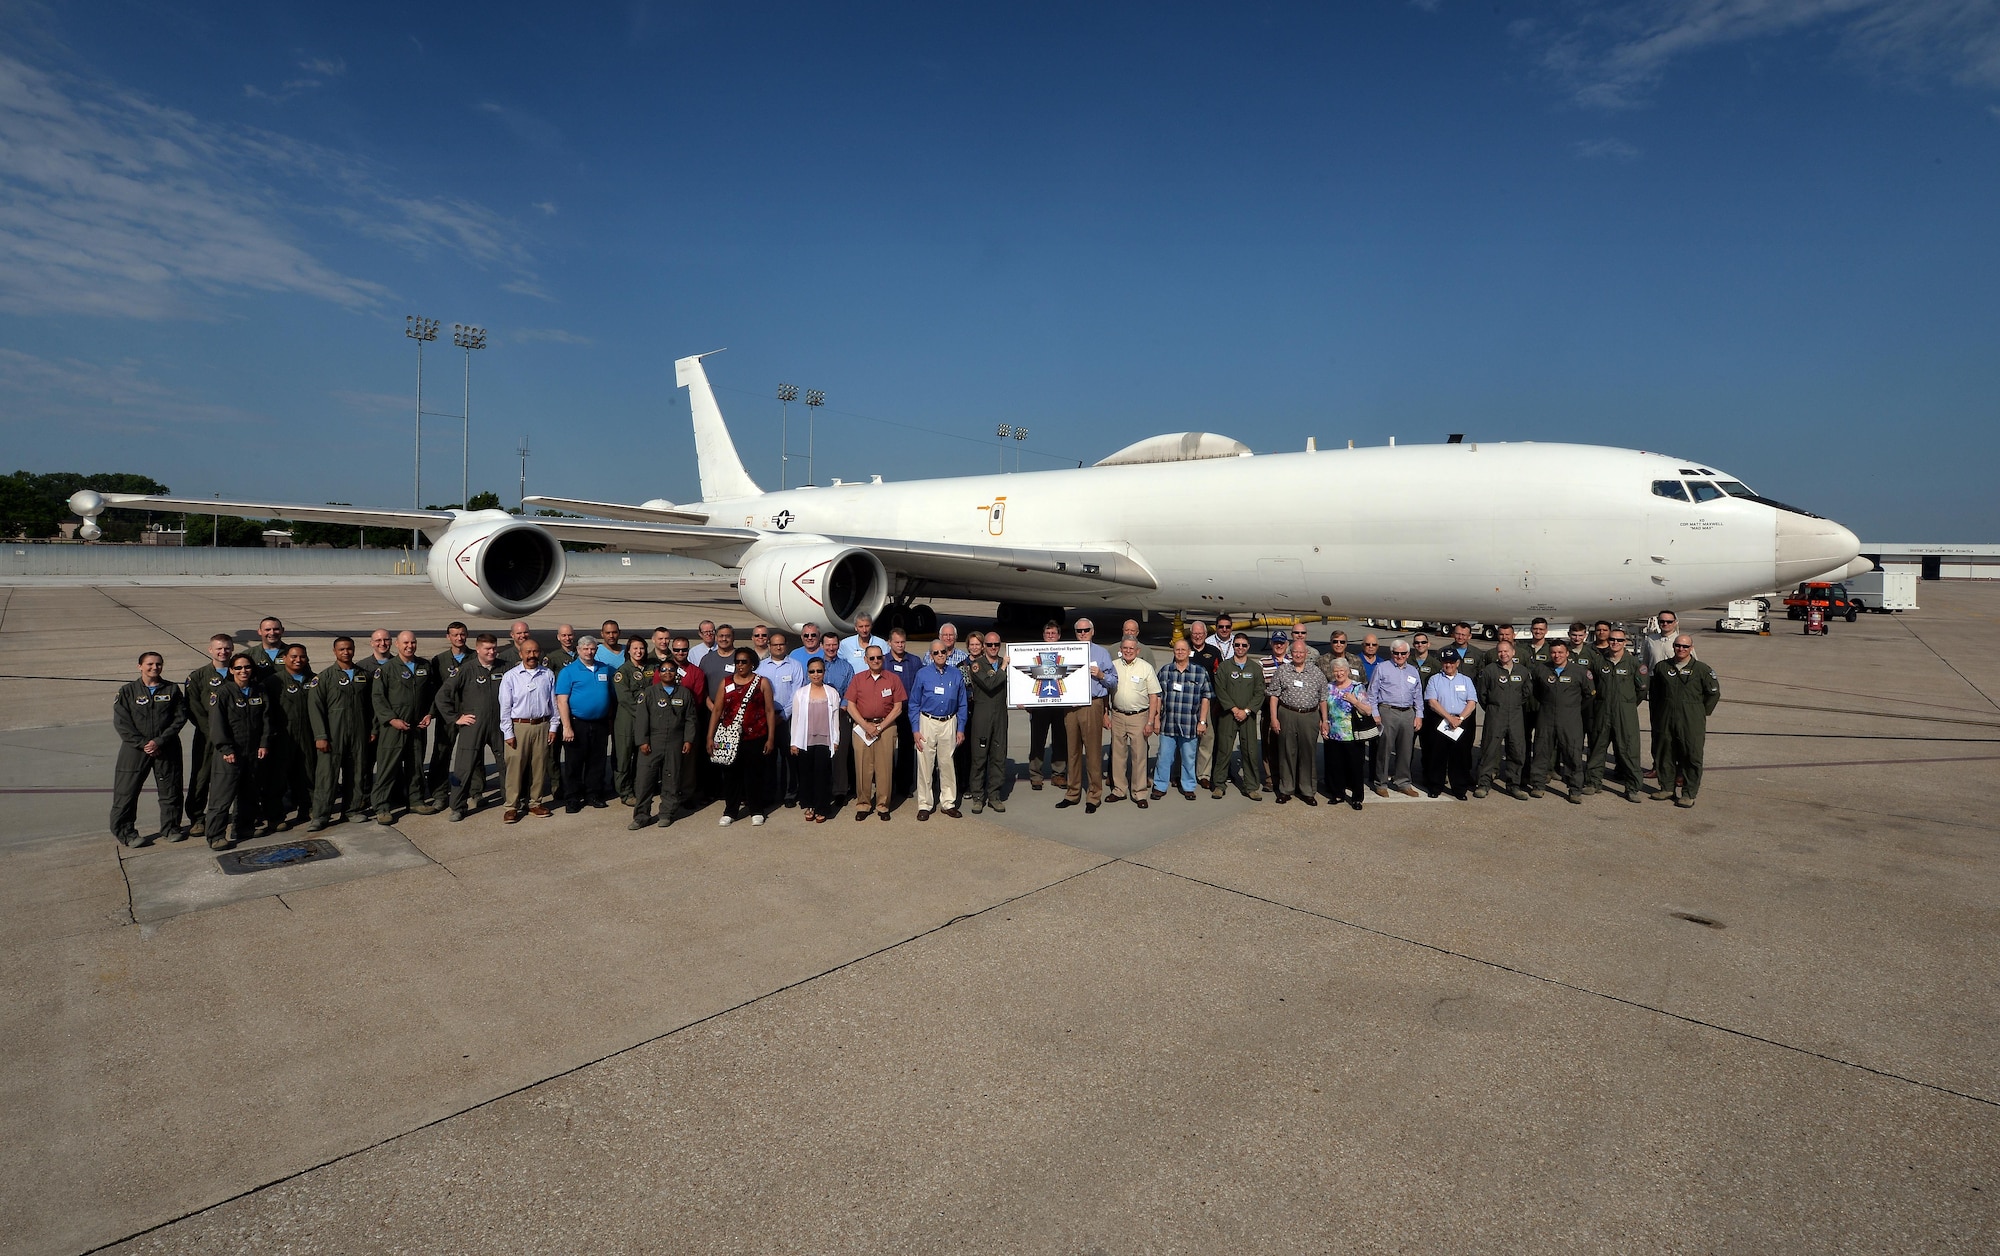 A group of past and present airborne missileers pose in front of an U.S. Navy E-6B Mercury to celebrate the 50th anniversary of the Airborne Launch Control System June 2. During their time here the group received a tour of the jet, a 625th Strategic Operations Squadron mission briefing, ate lunch at the Patriot Club and posed for a photo in front of an EC-135 Looking Glass, which is on static display next to the Kenney Gate (U.S. Air Force photo by Josh Plueger).